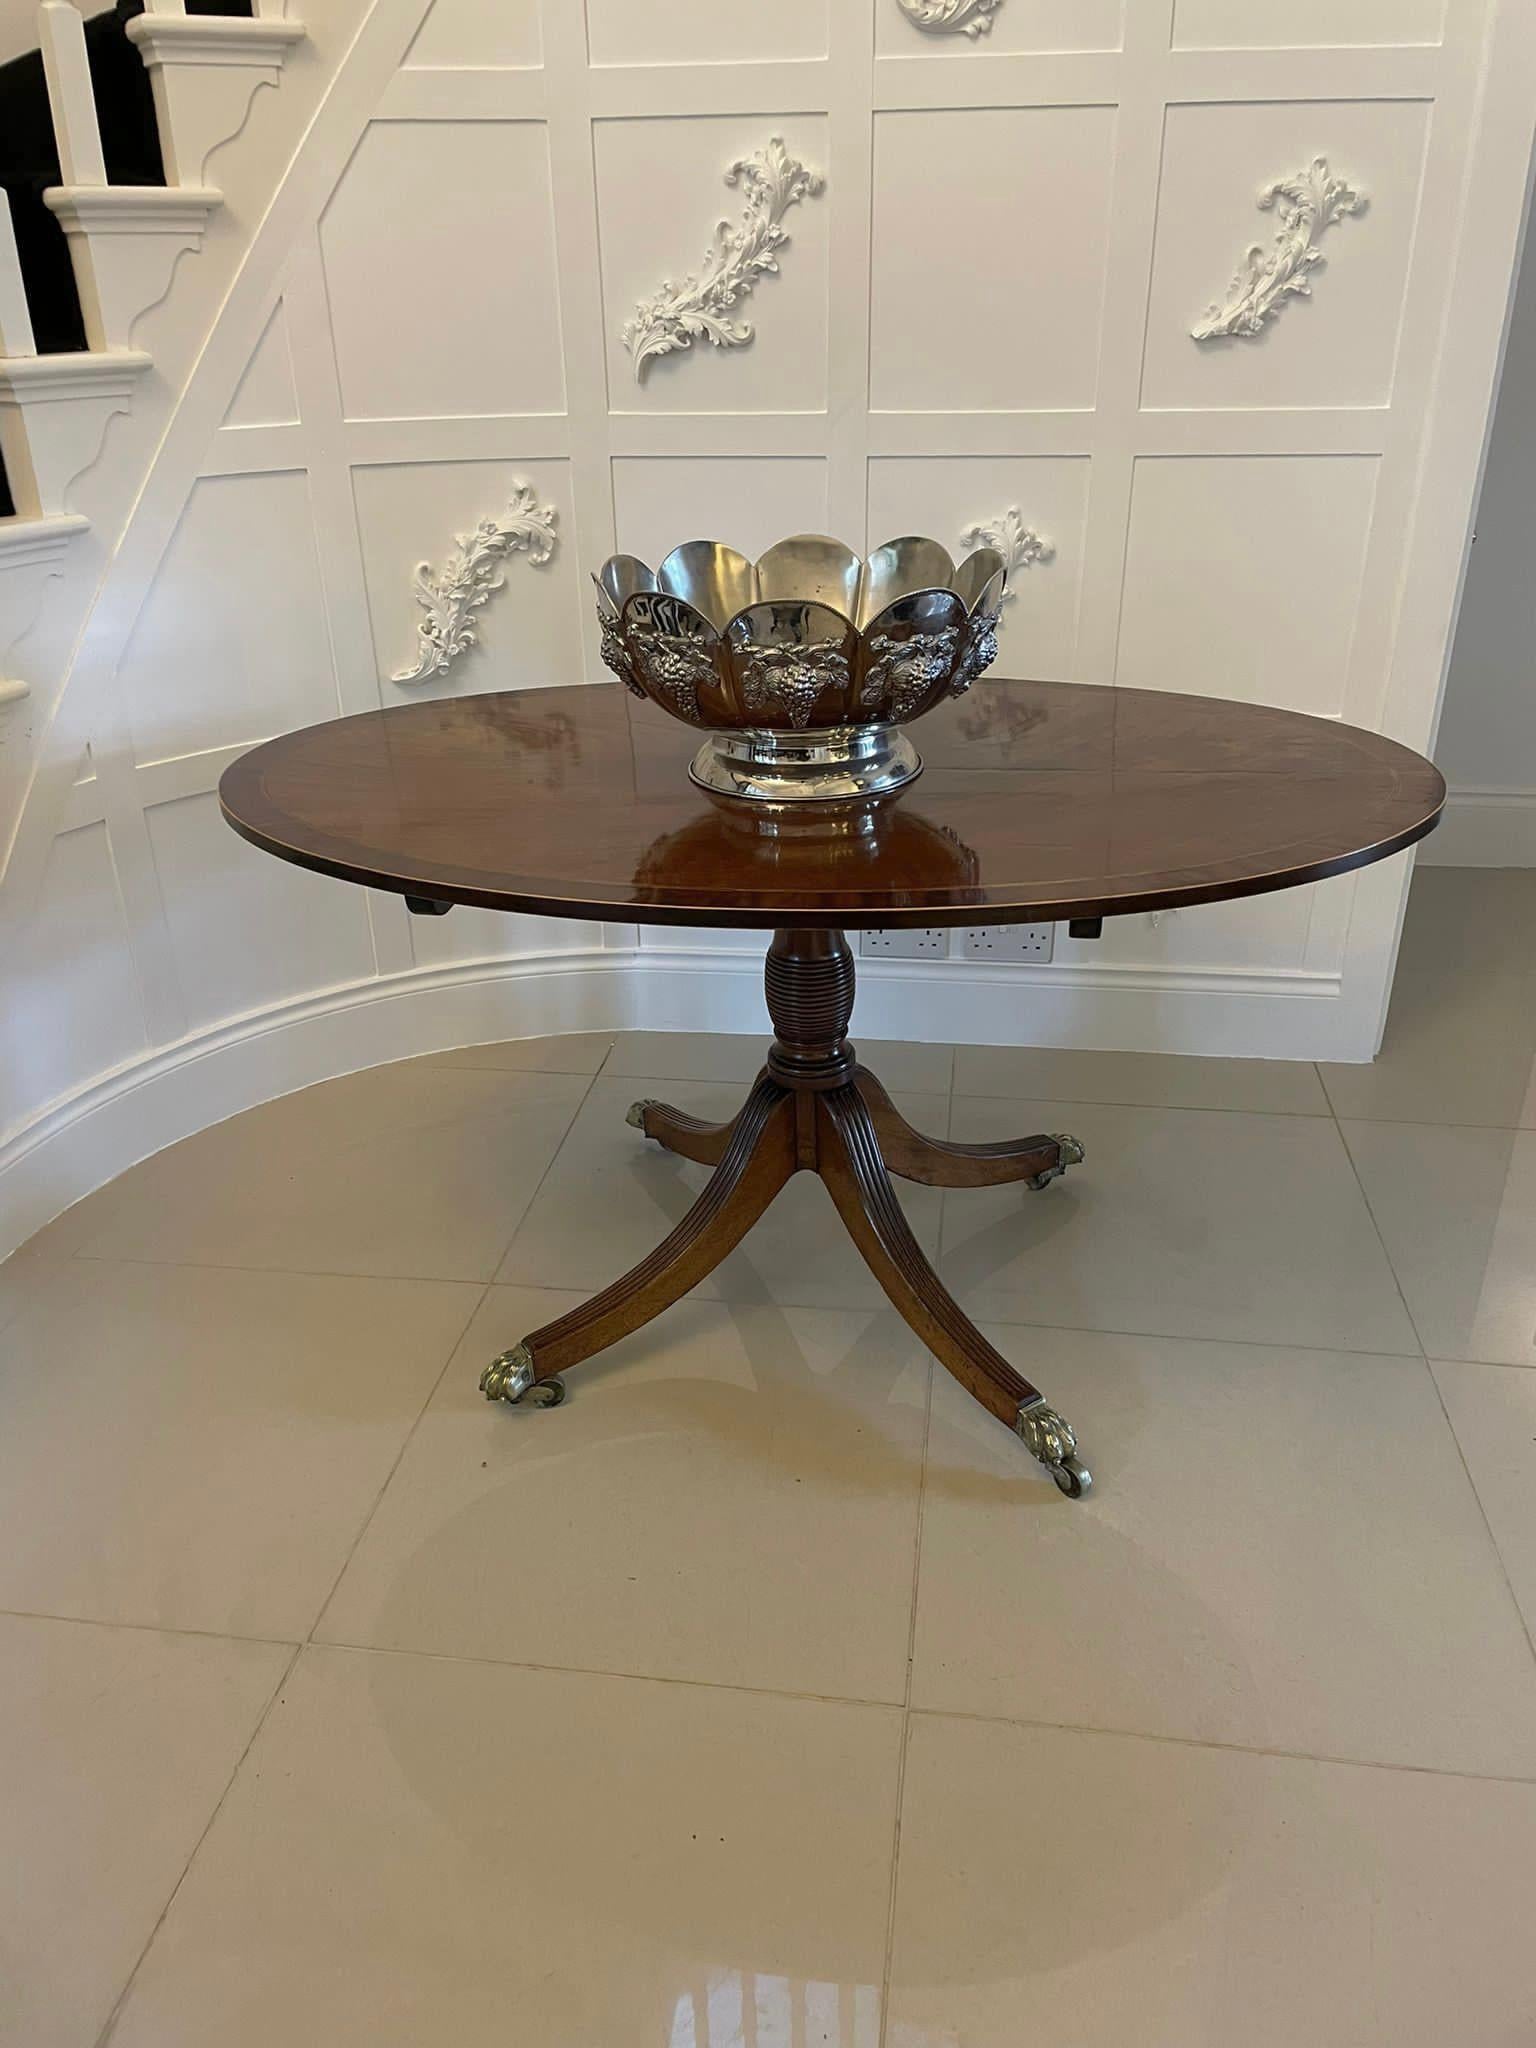 Superb quality antique George III mahogany oval centre table having a superb quality oval mahogany crossbanded tilt top with satinwood stringing supported on a turned column and raised on four shaped reeded sabre legs with original brass paw feet